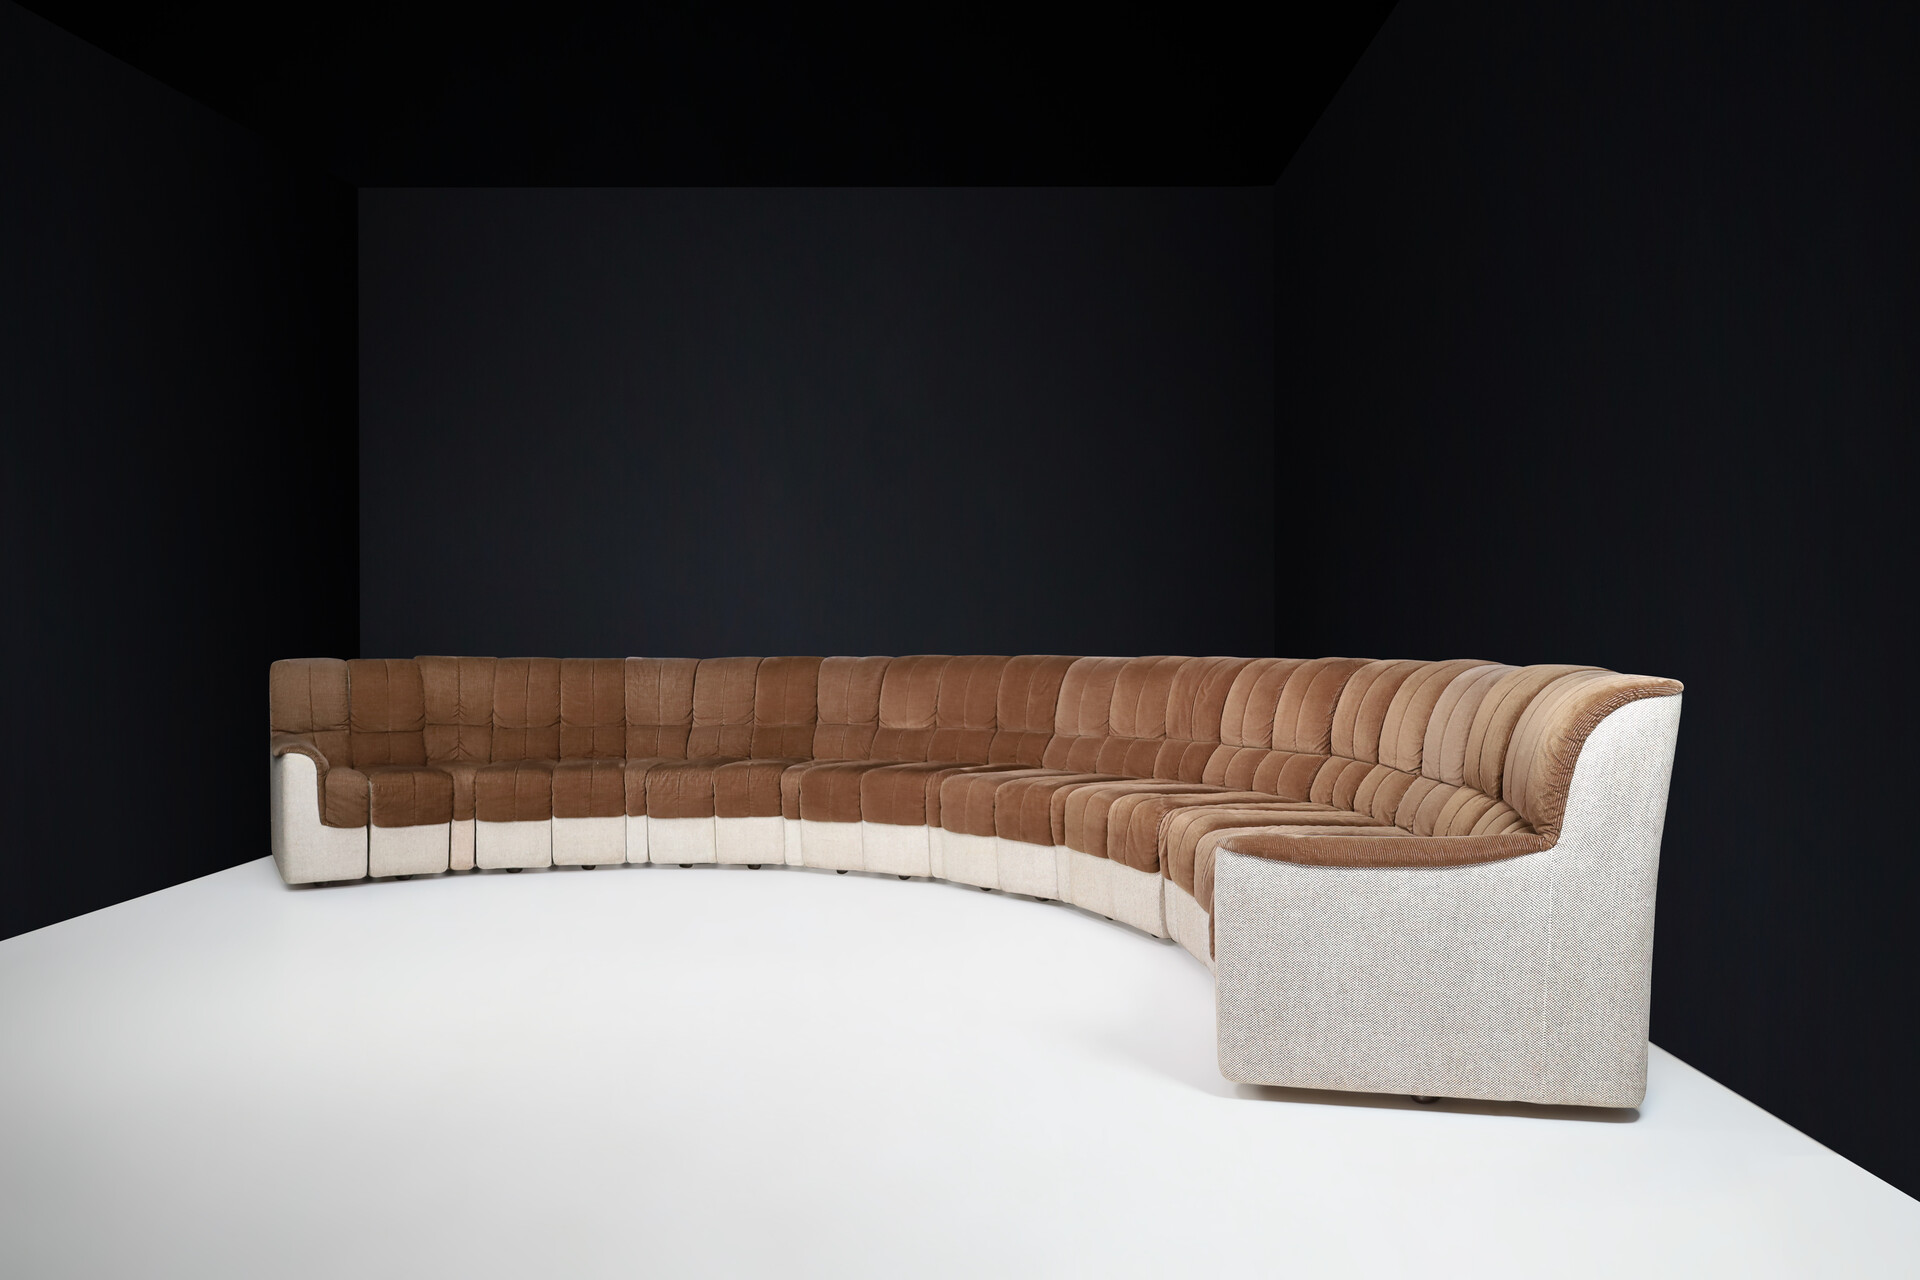 Mid century modern Cord fabric sofa in the style of De Sede DS-600 'Snake' Sectional , Germany 1970s Late-20th century